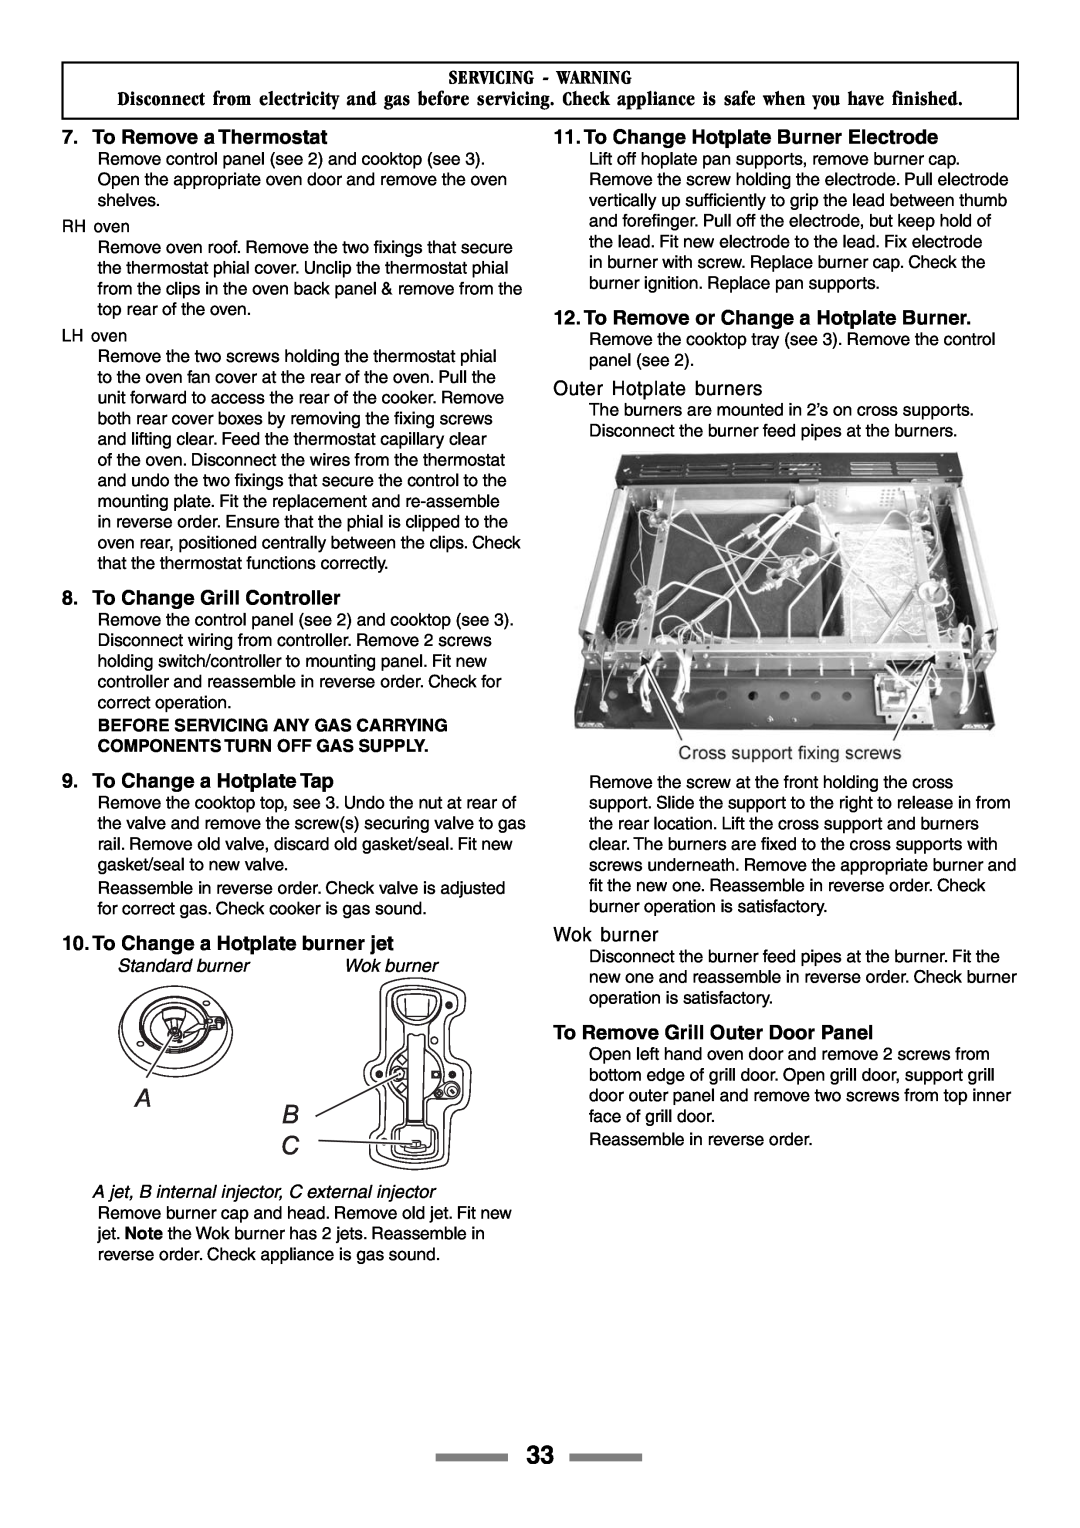 Rangemaster 90 manual To Remove a Thermostat, To Change Grill Controller, To Change a Hotplate Tap, Servicing - Warning 